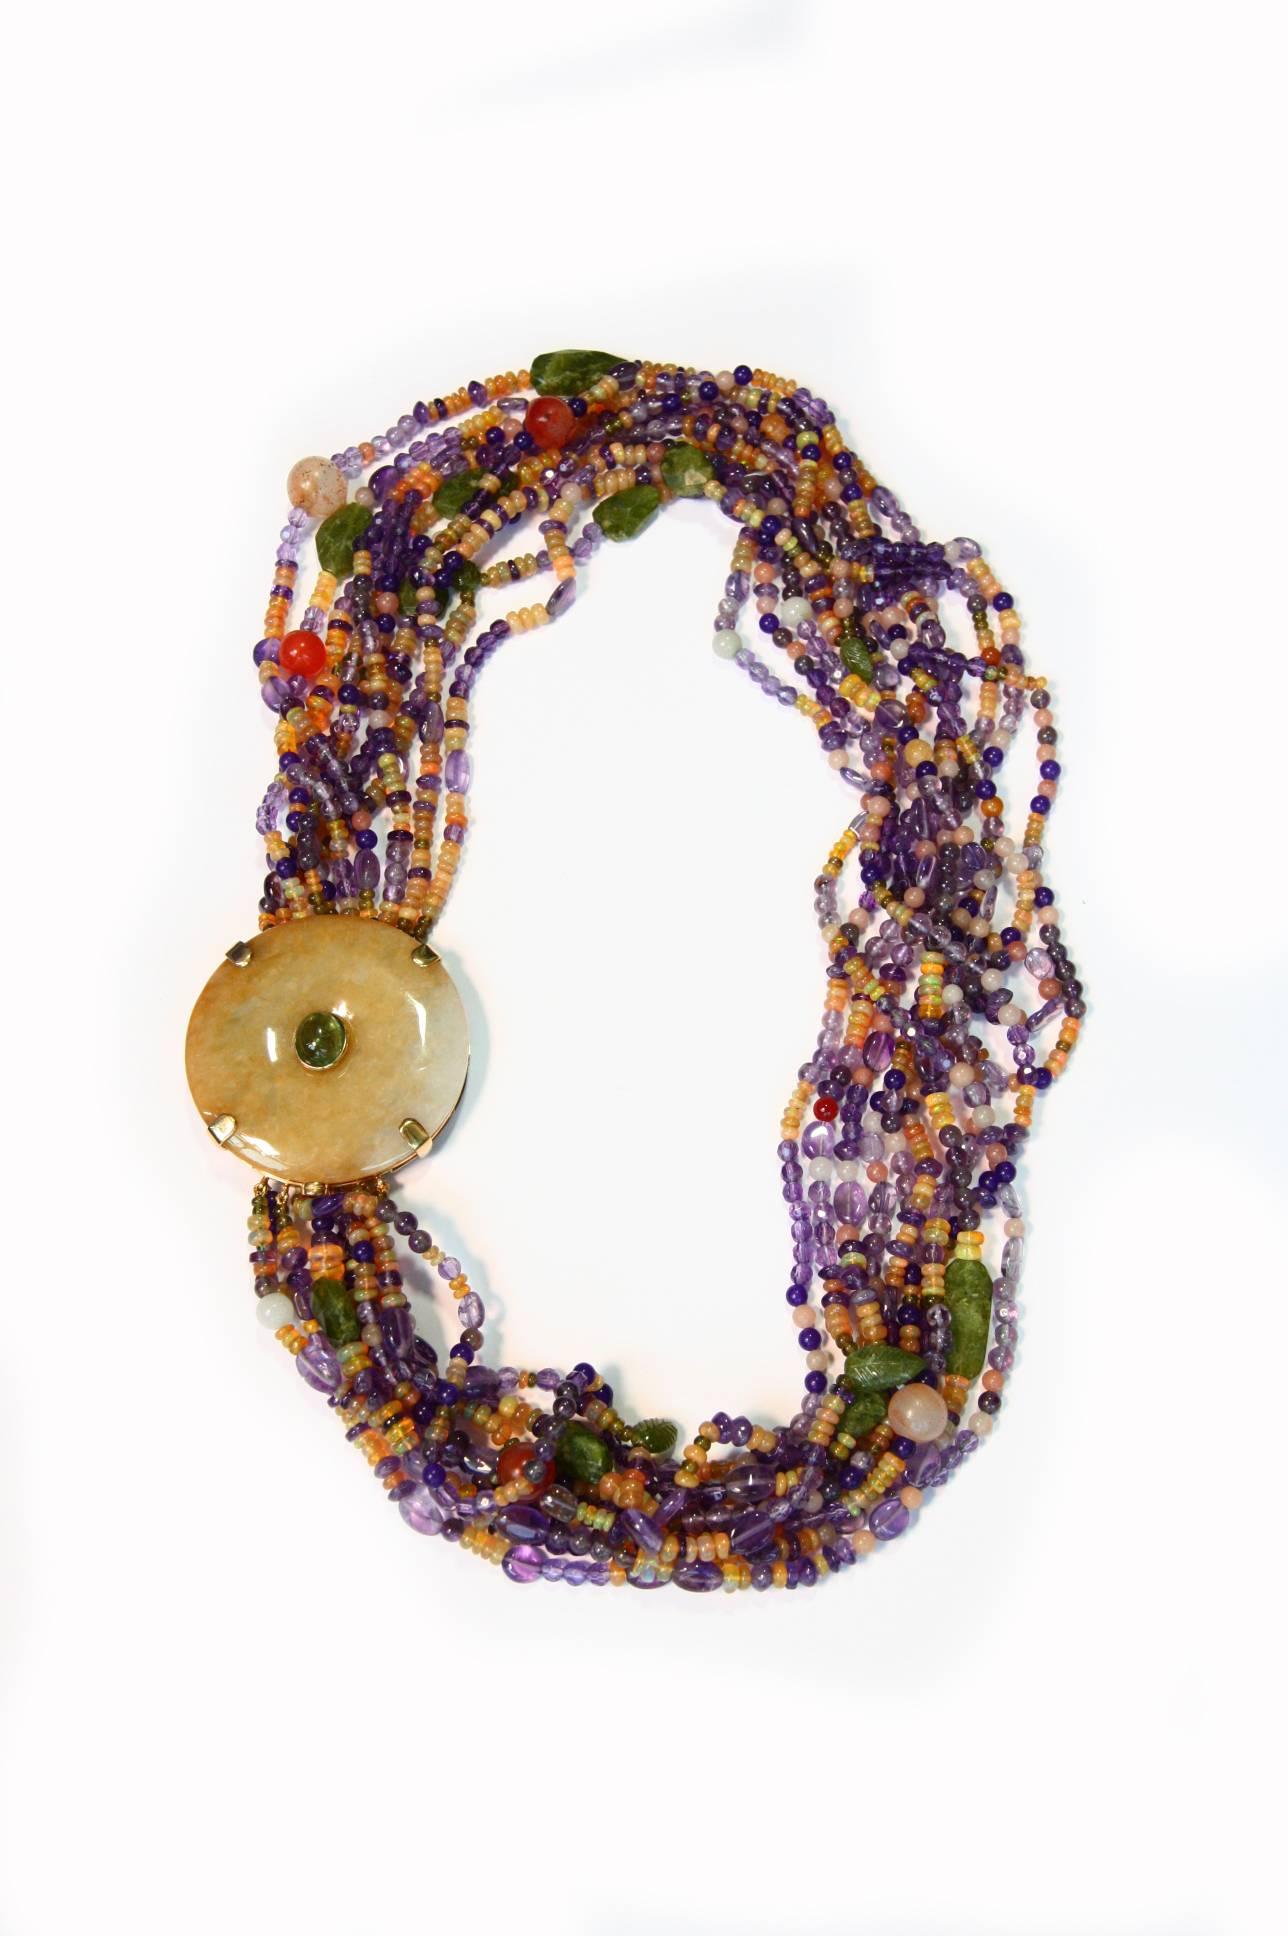 Degradè long necklace total length 31 cm, amethyst, fire opal, tourmaline, vesuvianite, little leaf in green vesuvianite,  big BI in  jade used like a closure, cabochon green tourmaline, 18kt gold gr. 29,00.
All Giulia Colussi jewelry is new and has